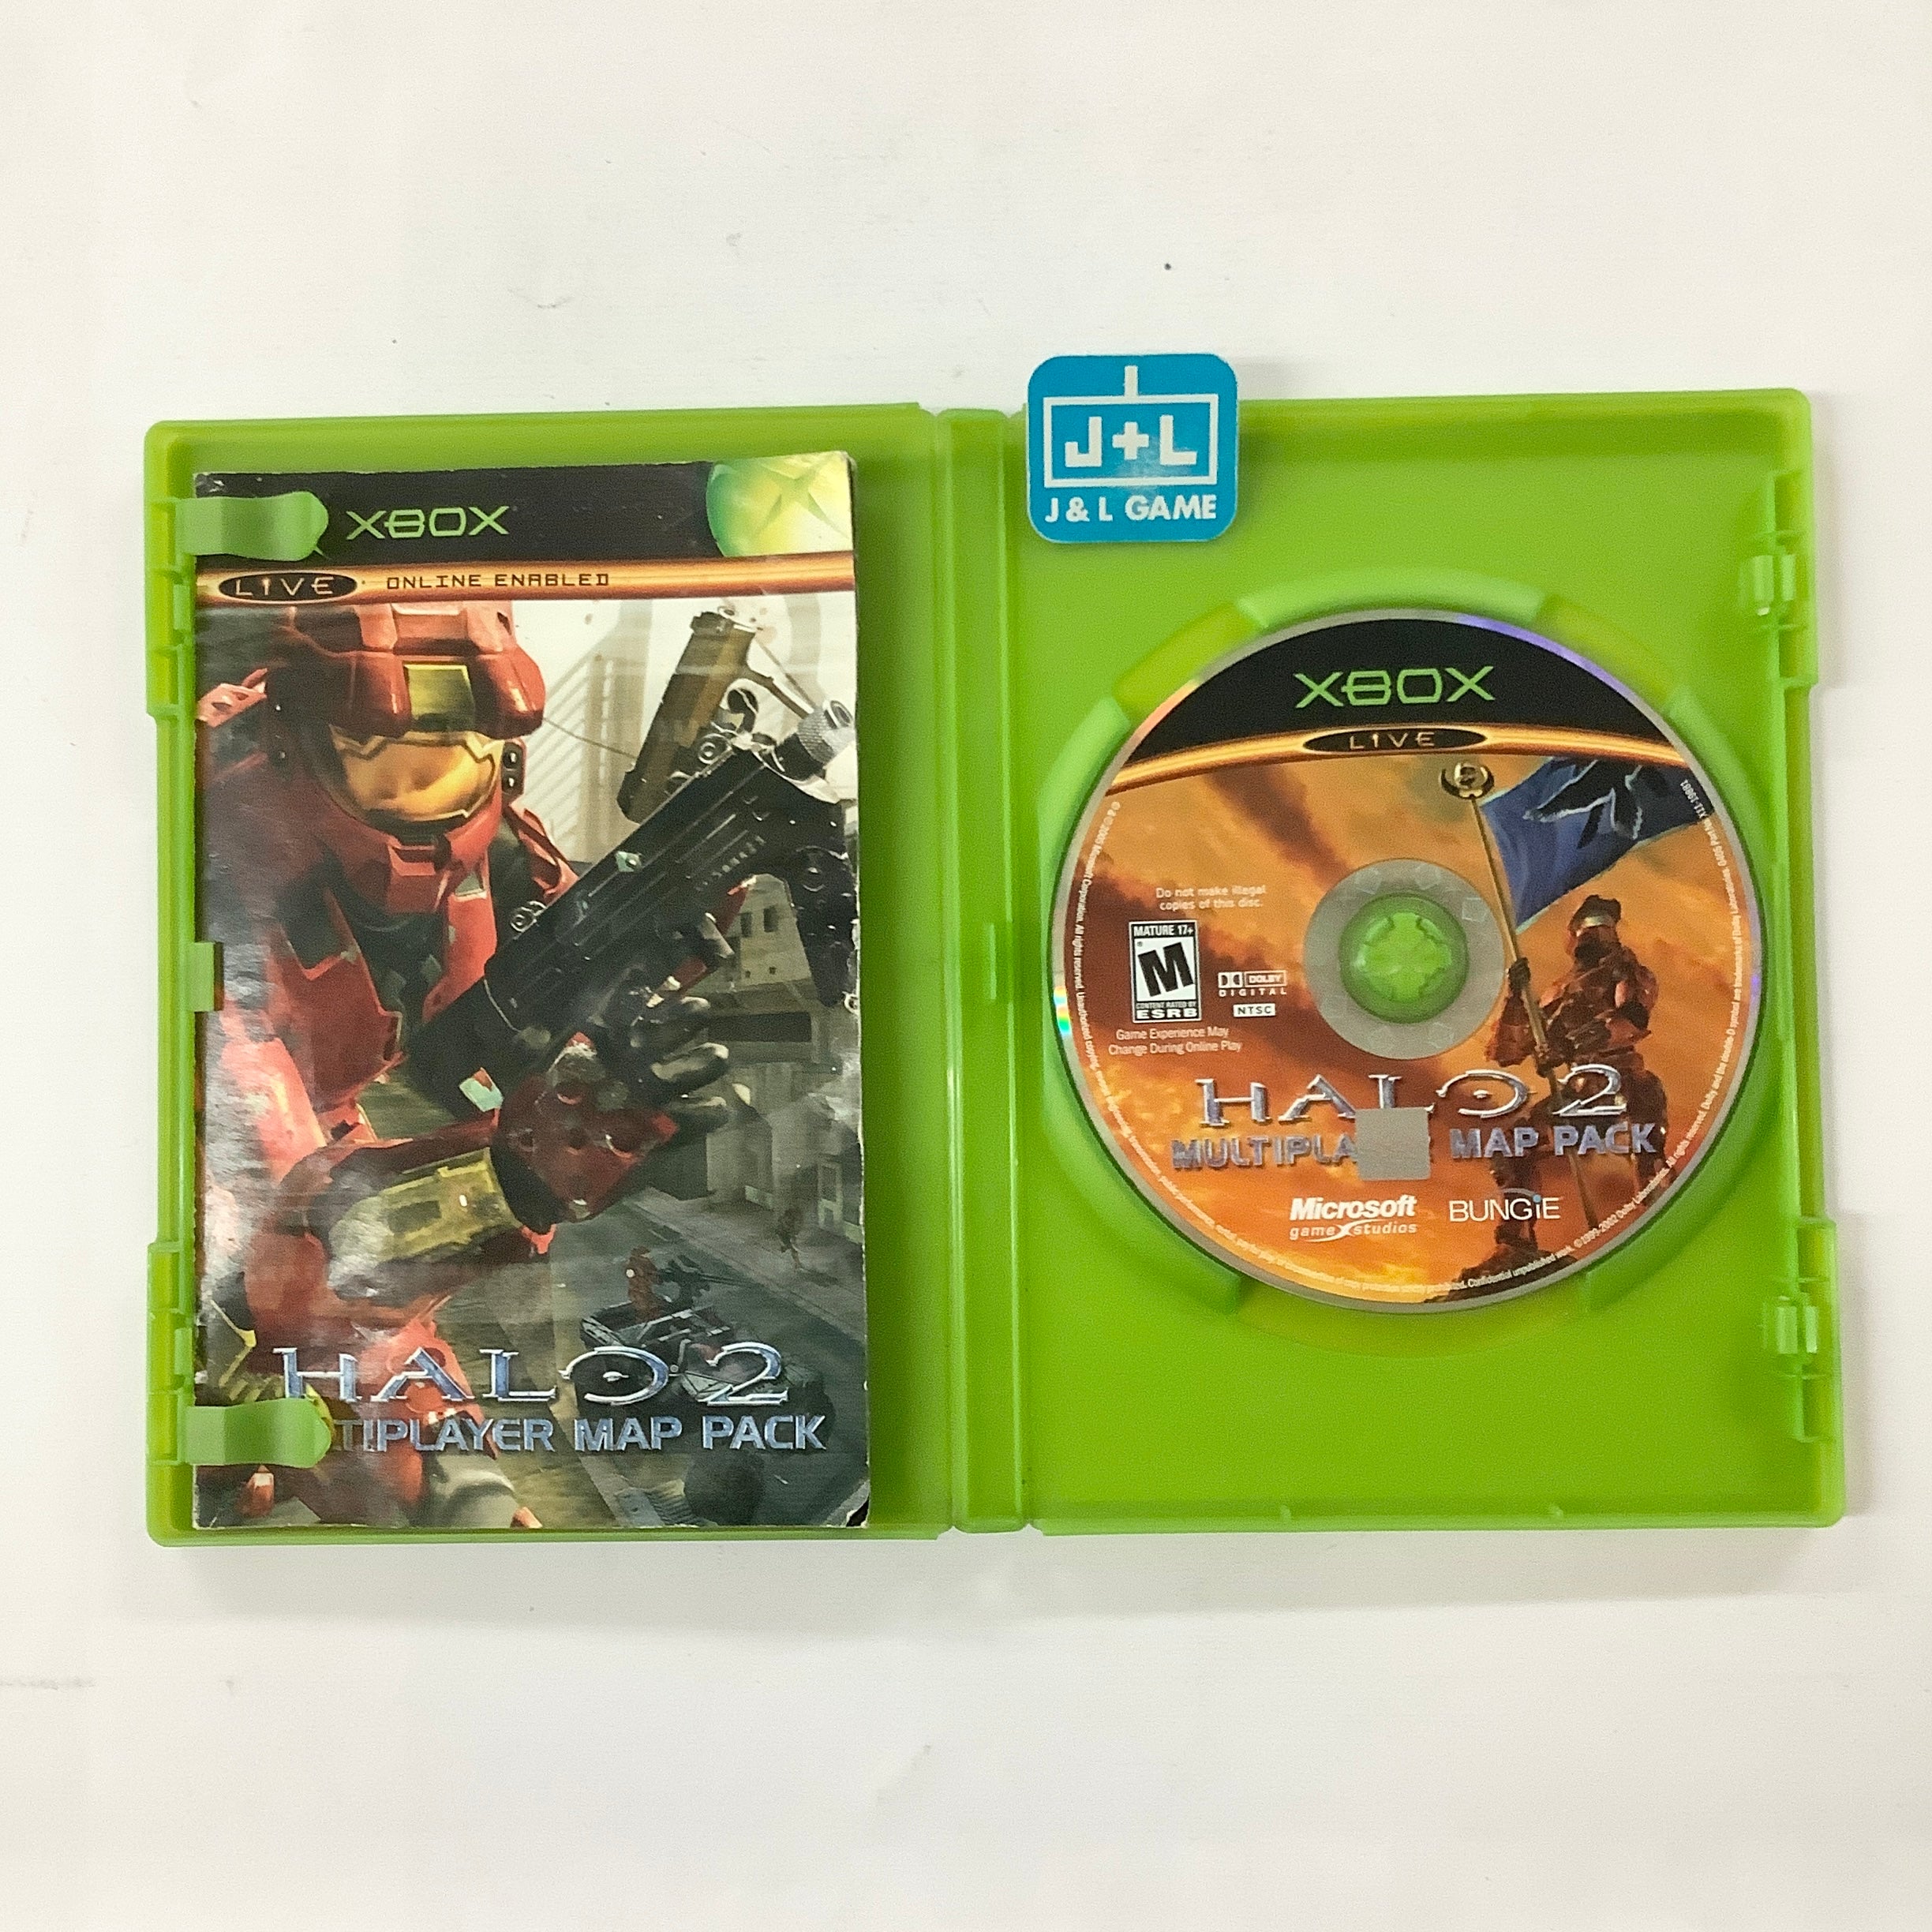 Halo 2 Multiplayer Map Pack - (XB) Xbox [Pre-Owned] Video Games Microsoft Game Studios   